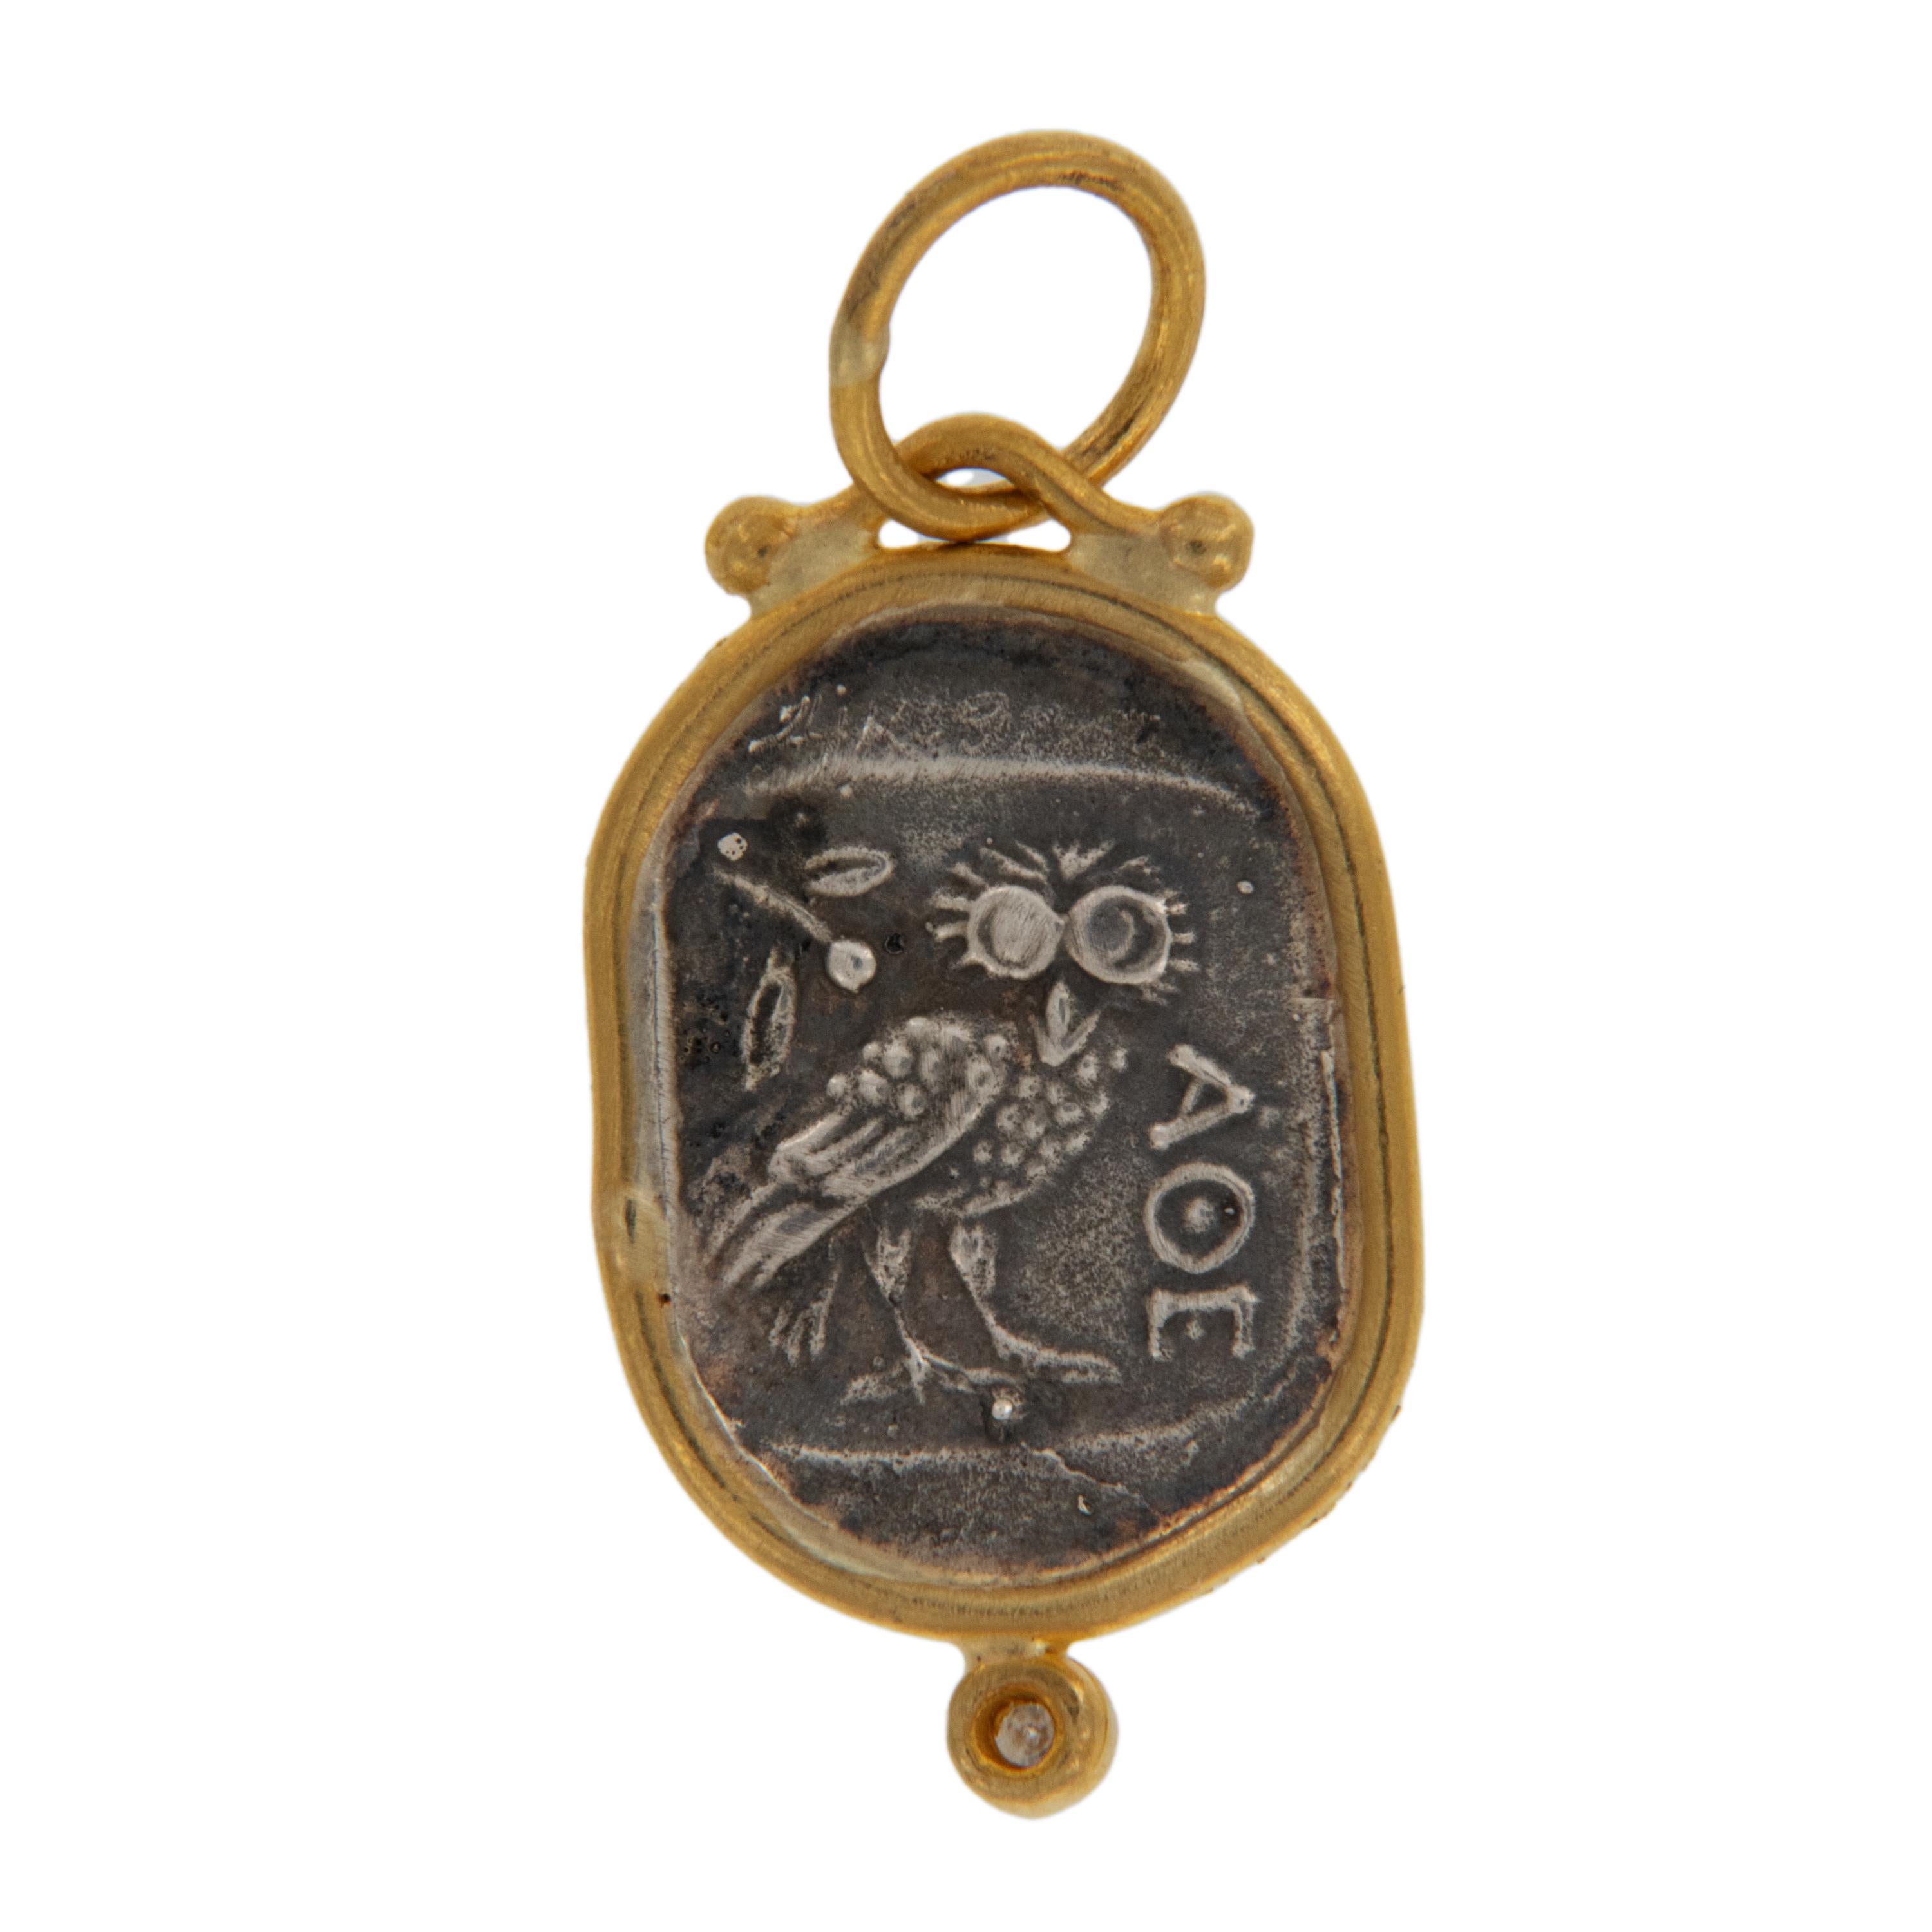 Rarest of all the golds, 24 karat gold is valued by all discerning investors. With it's unmistakable warm yellow color & hammered finish this ancient square replica Athena Wisdom Goddess coin with  accented with diamond is truly museum quality. The